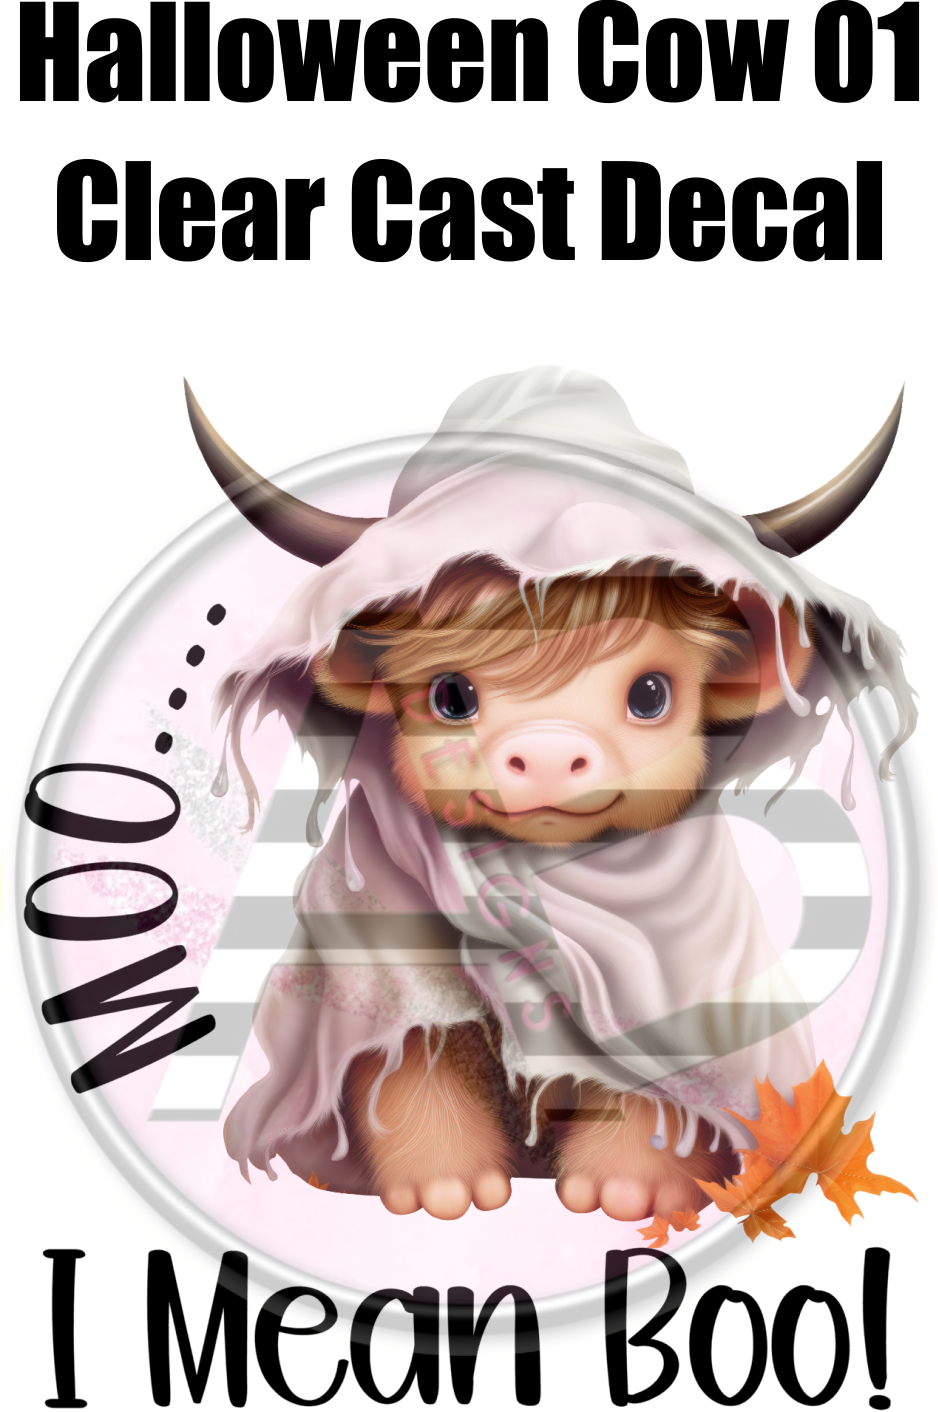 Halloween Cow 01 - Clear Cast Decal